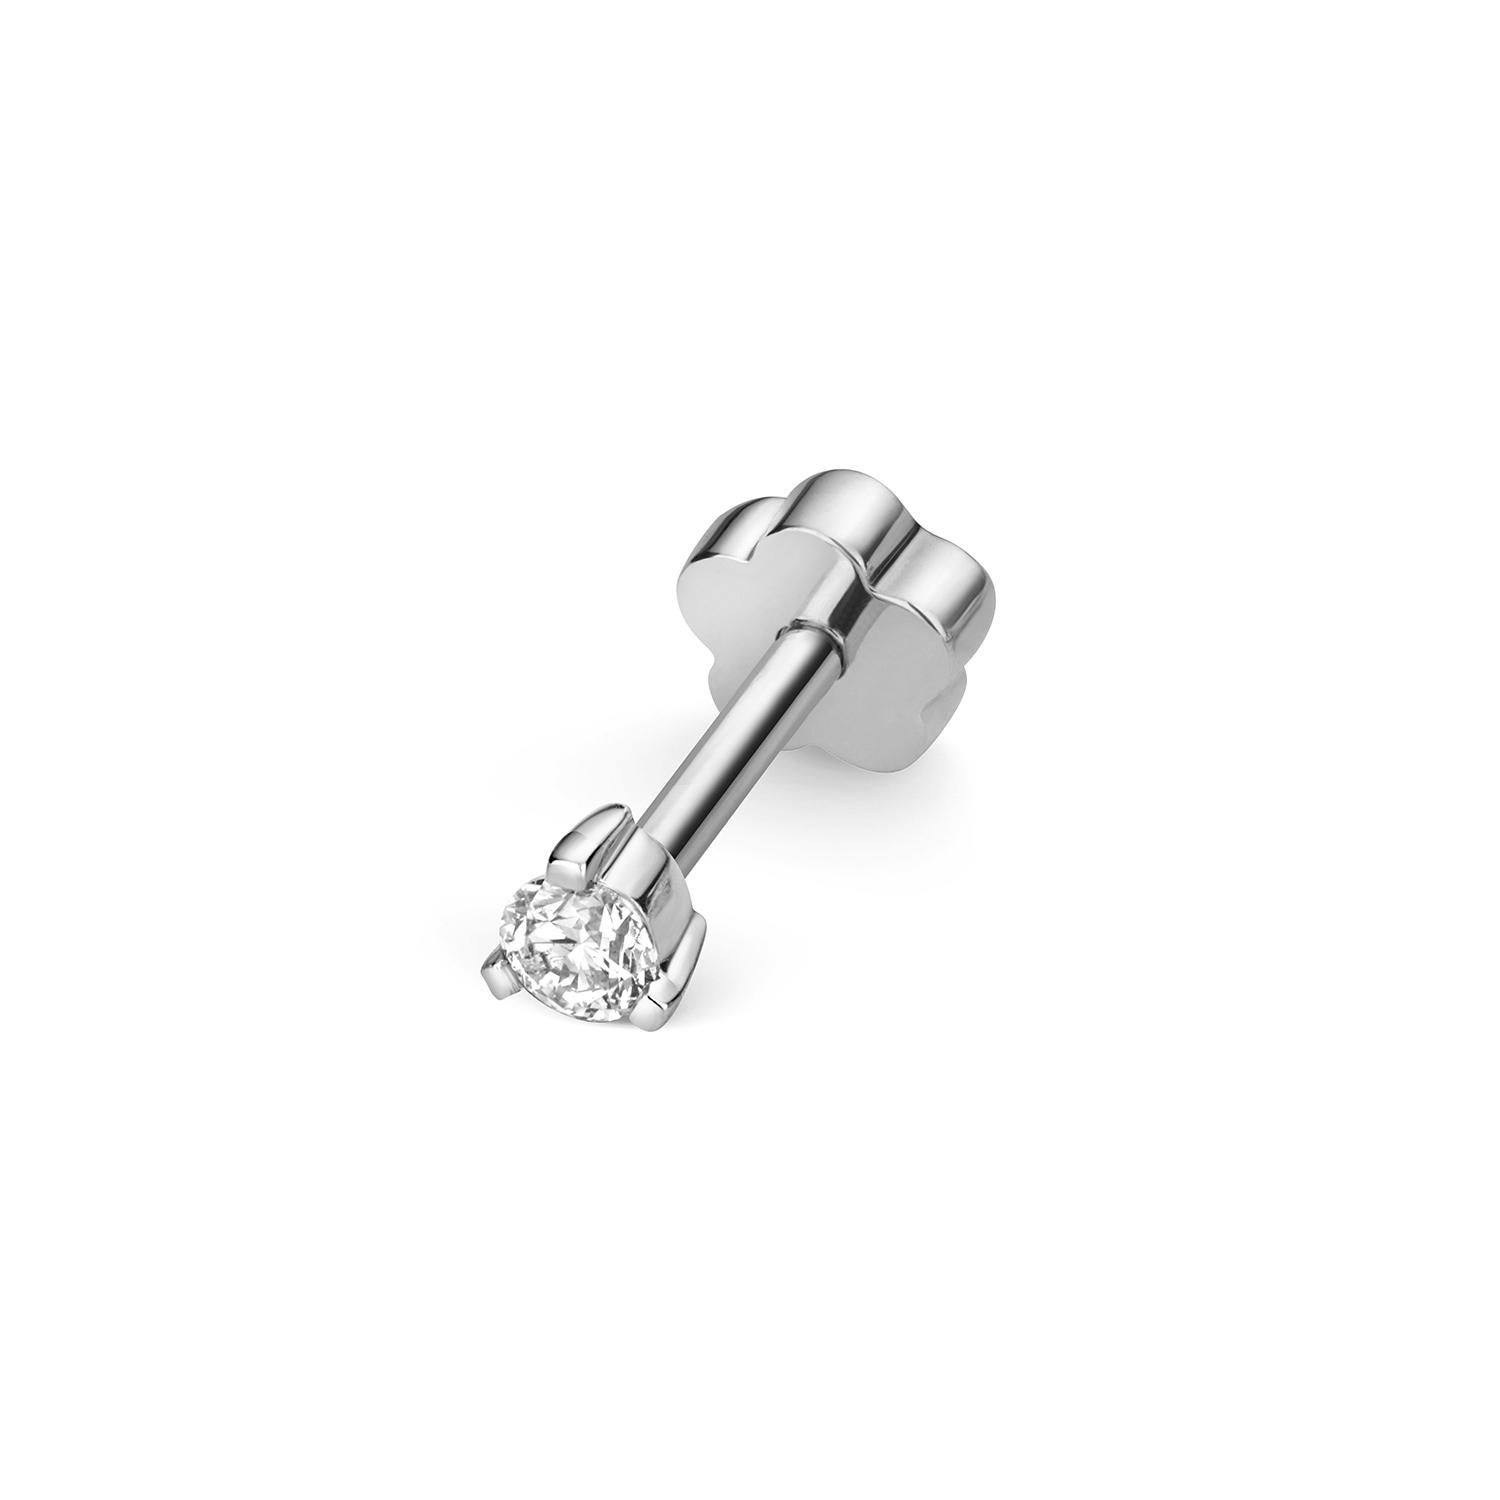 DIAMOND CARTILAGE 3CLAW STUD

18CT W/G 

0.05ct

G

SI

Weight: 0.6g